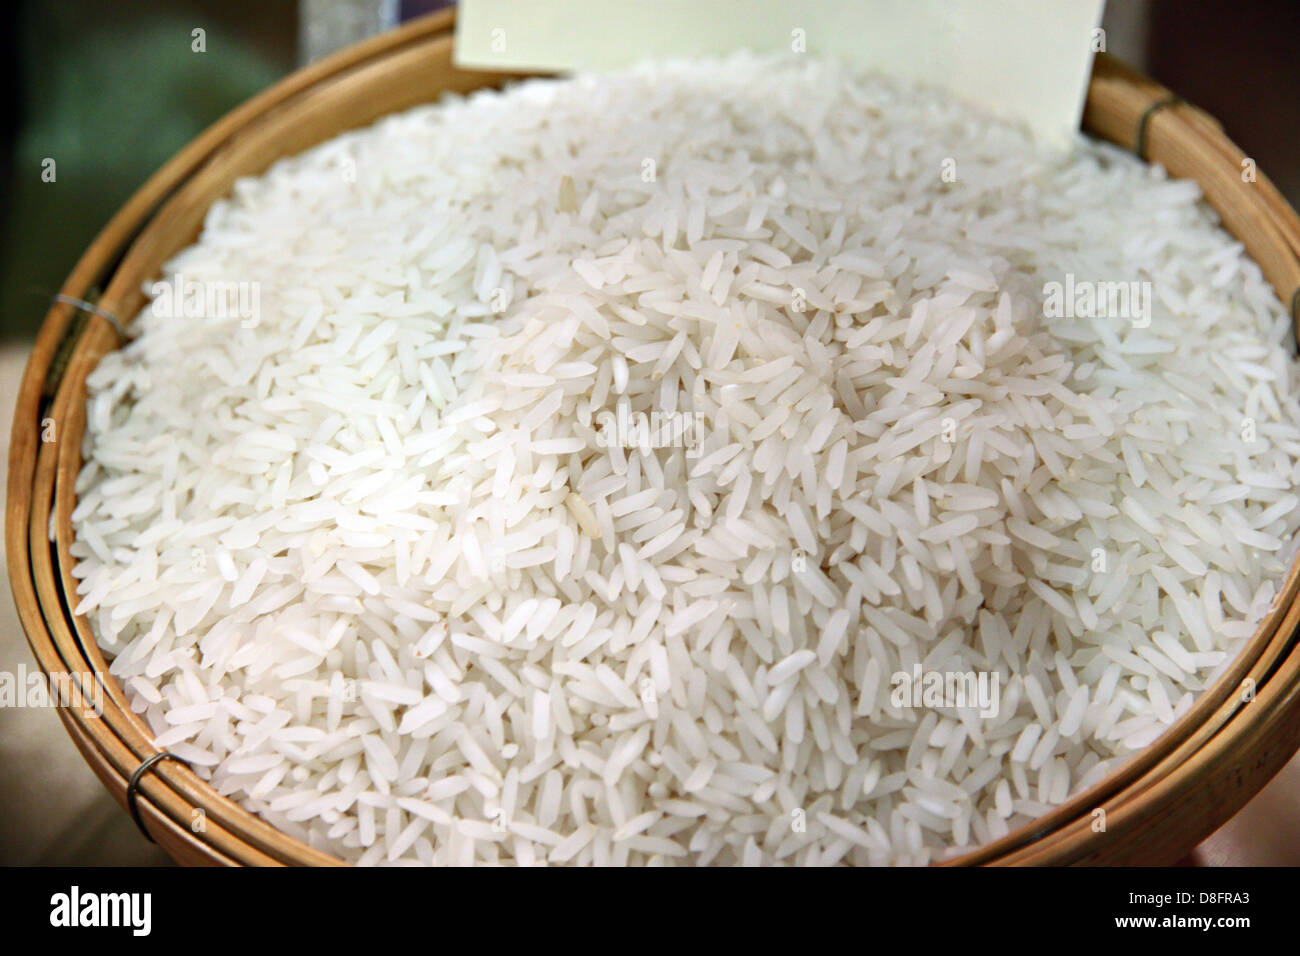 The Rice Grain in container.The rice is white color. Stock Photo